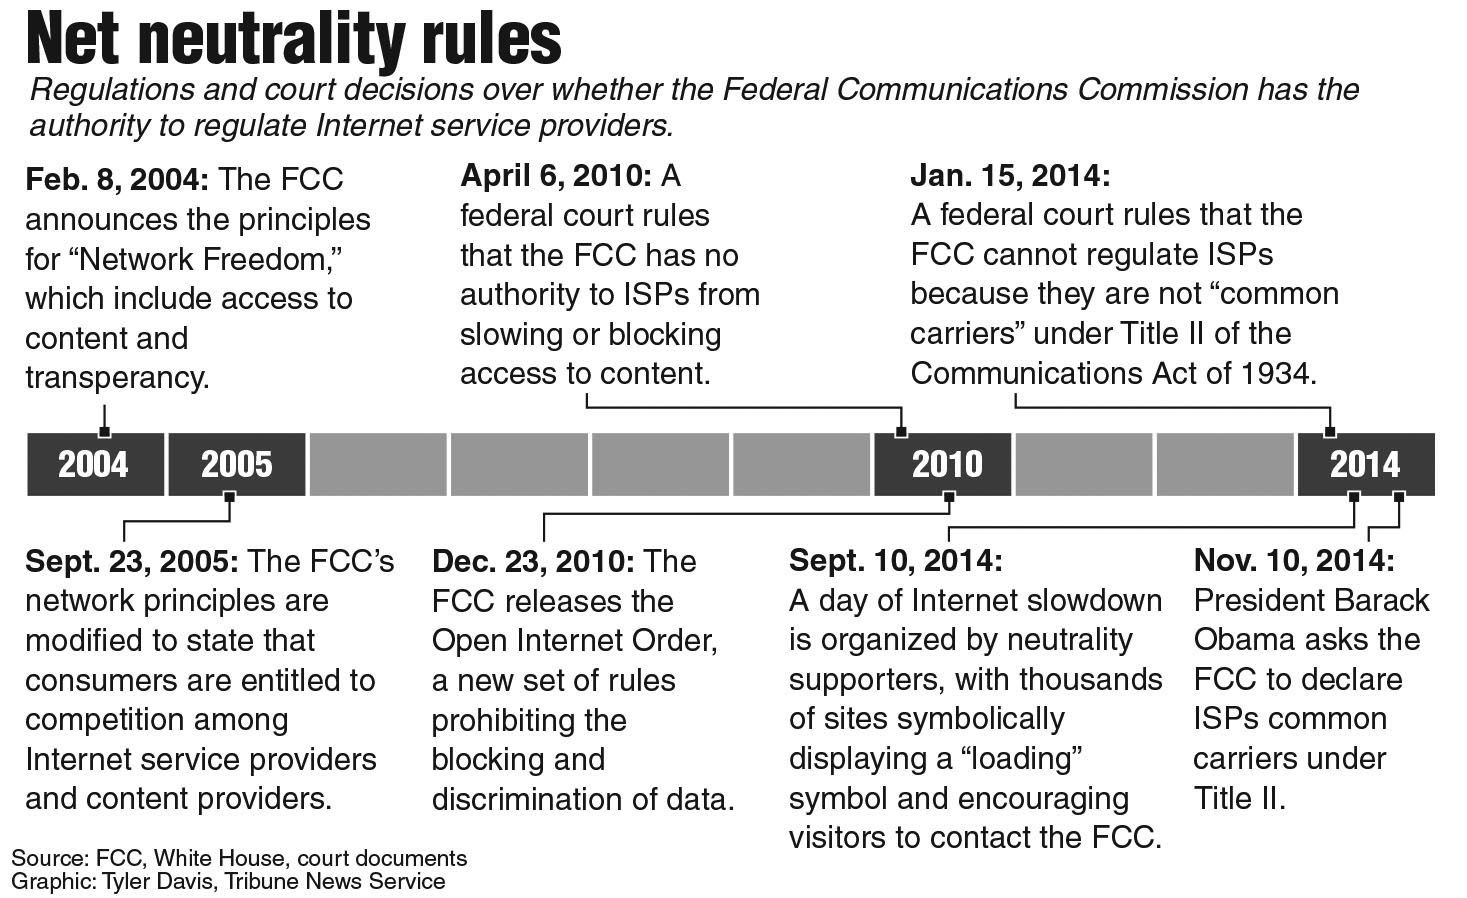 Timeline+of+rules+and+court+decisions+on+net+neutrality.+MCT+2014